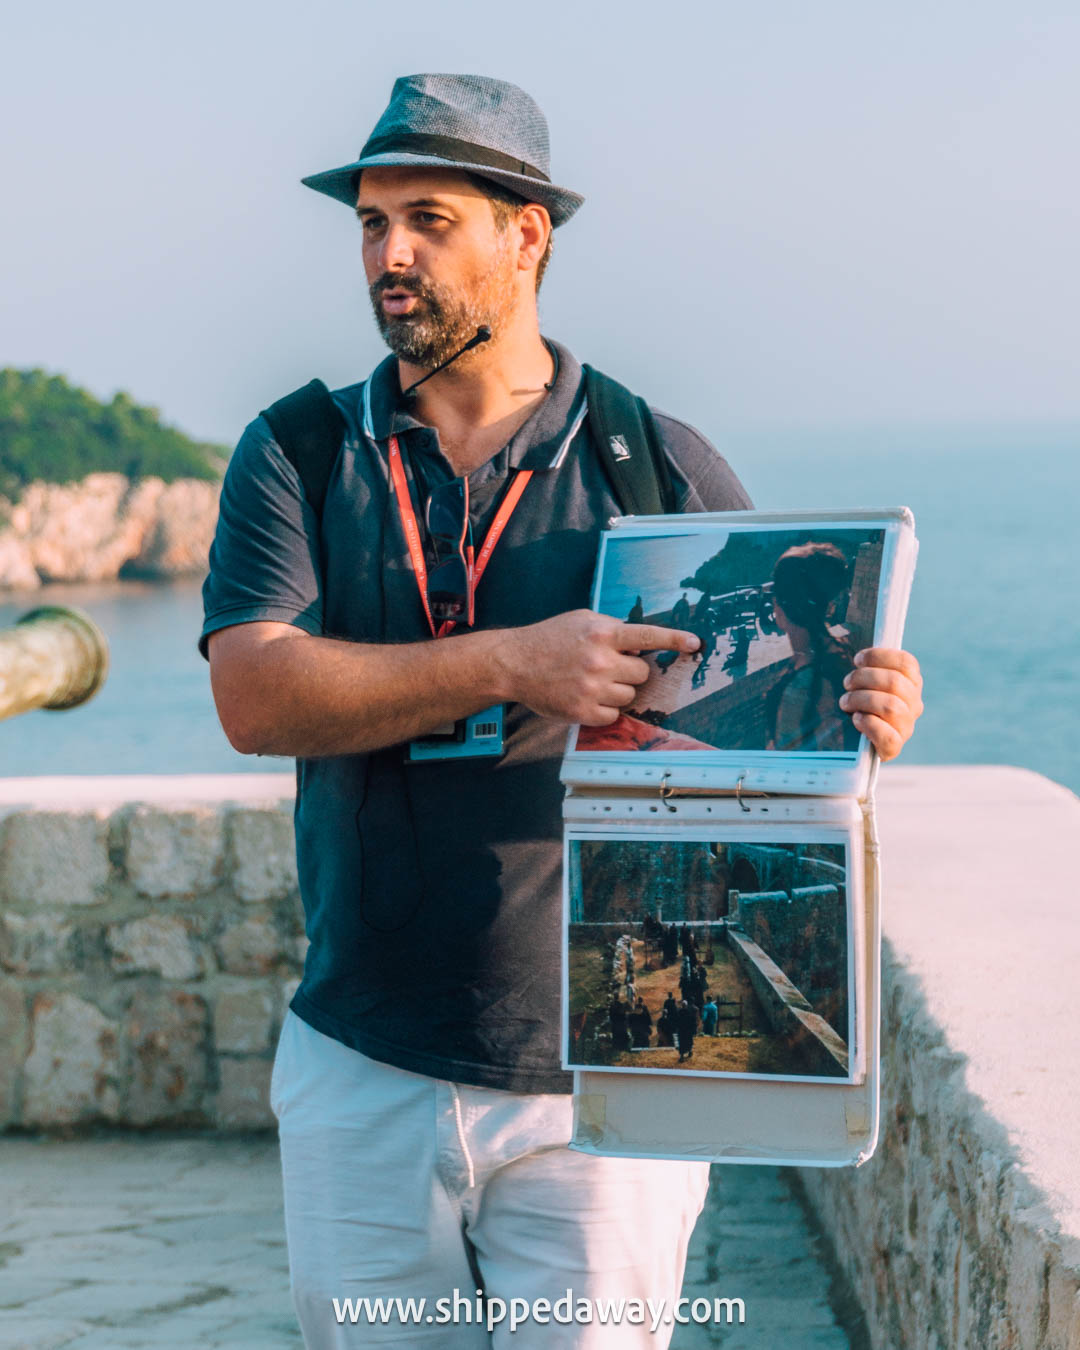 game of thrones tour dubrovnik, best game of thrones tours dubrovnik, dubrovnik croatia, dubrovnik game of thrones